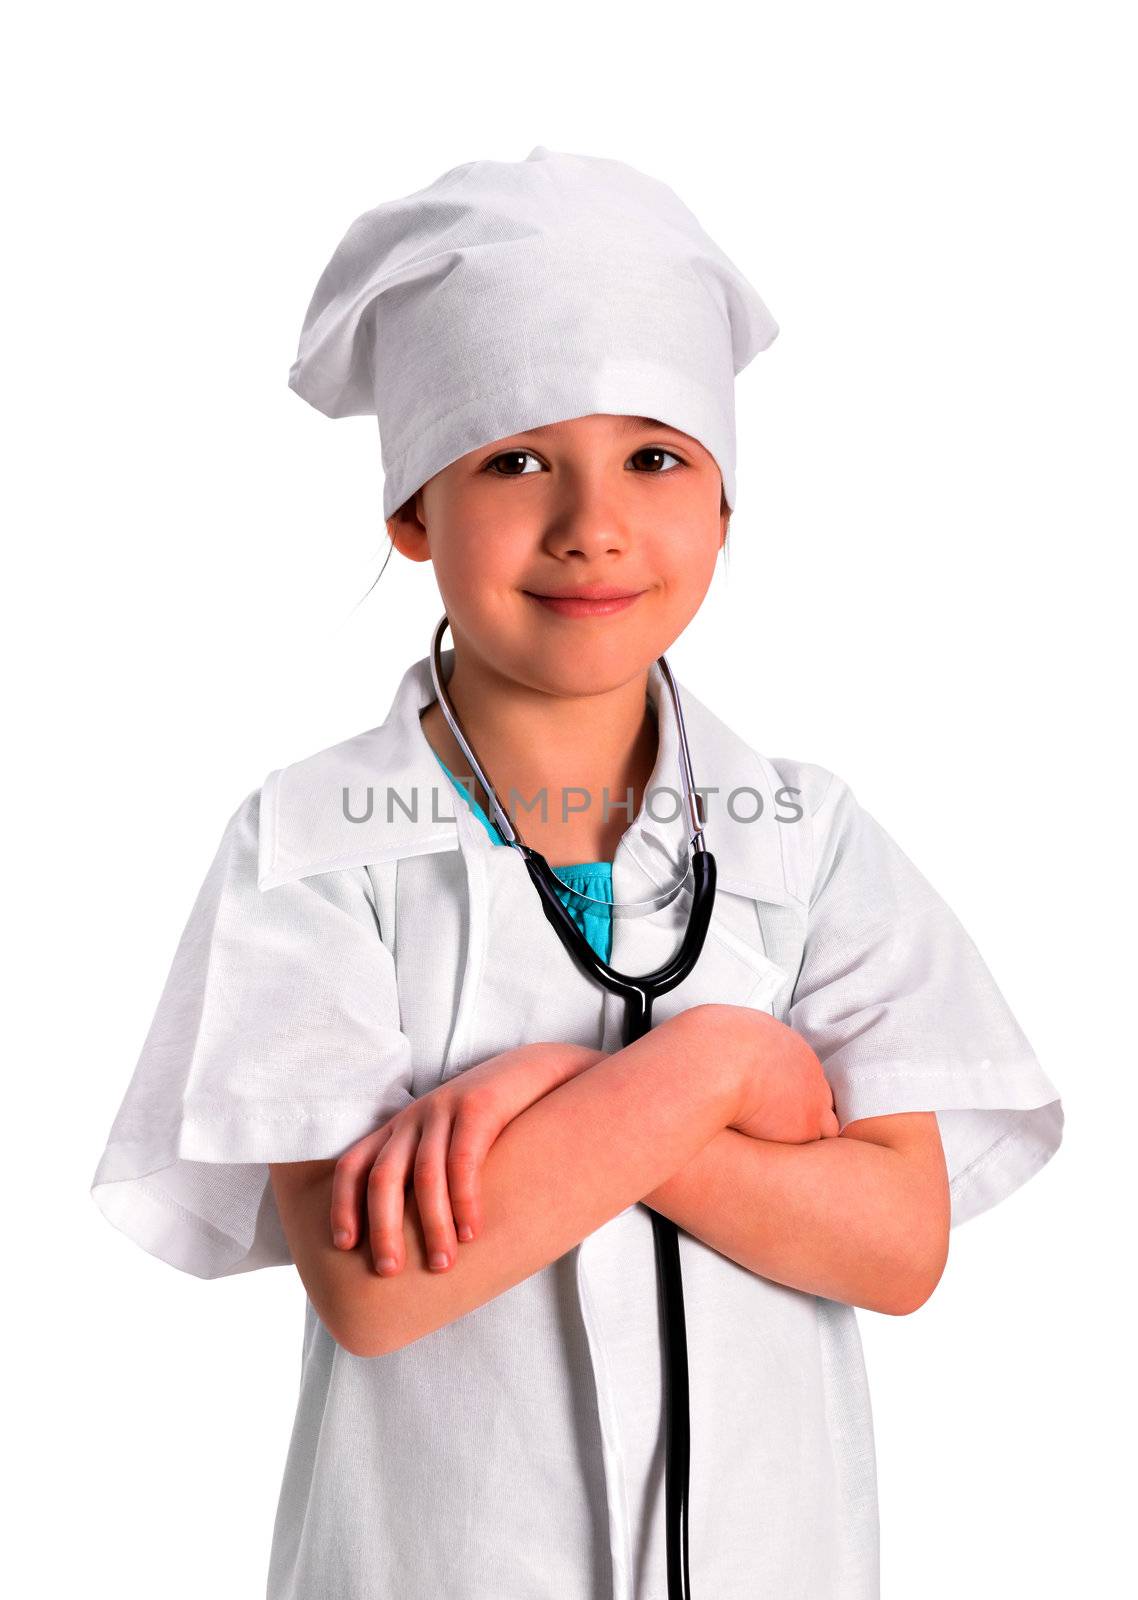 Portrait of a smiling little girl wearing as a nurse on white uniform, with a stethoscope, standing with her arms folded